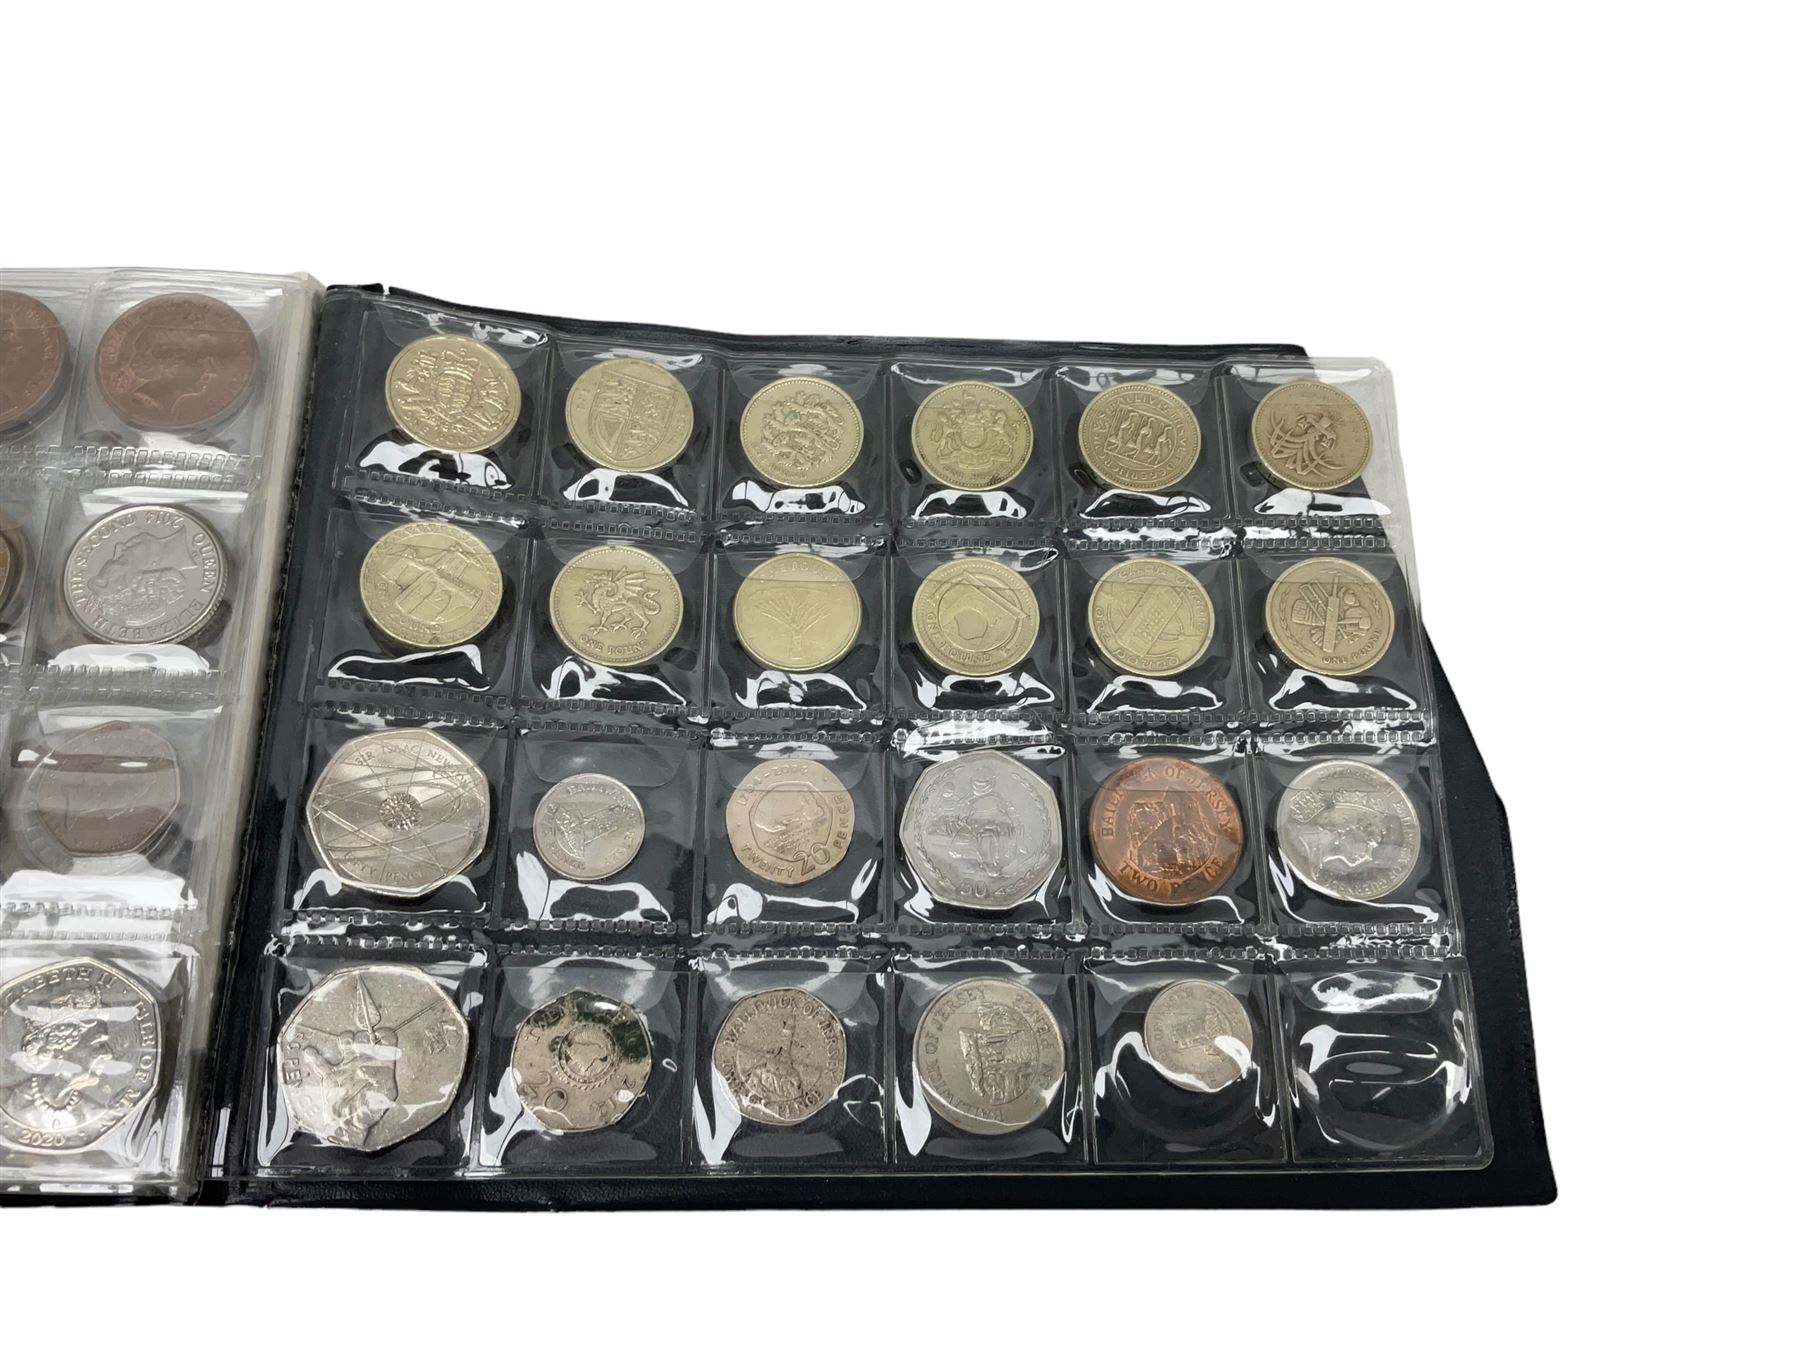 Mostly Great British Queen Elizabeth II commemorative coins from circulation - Image 10 of 10